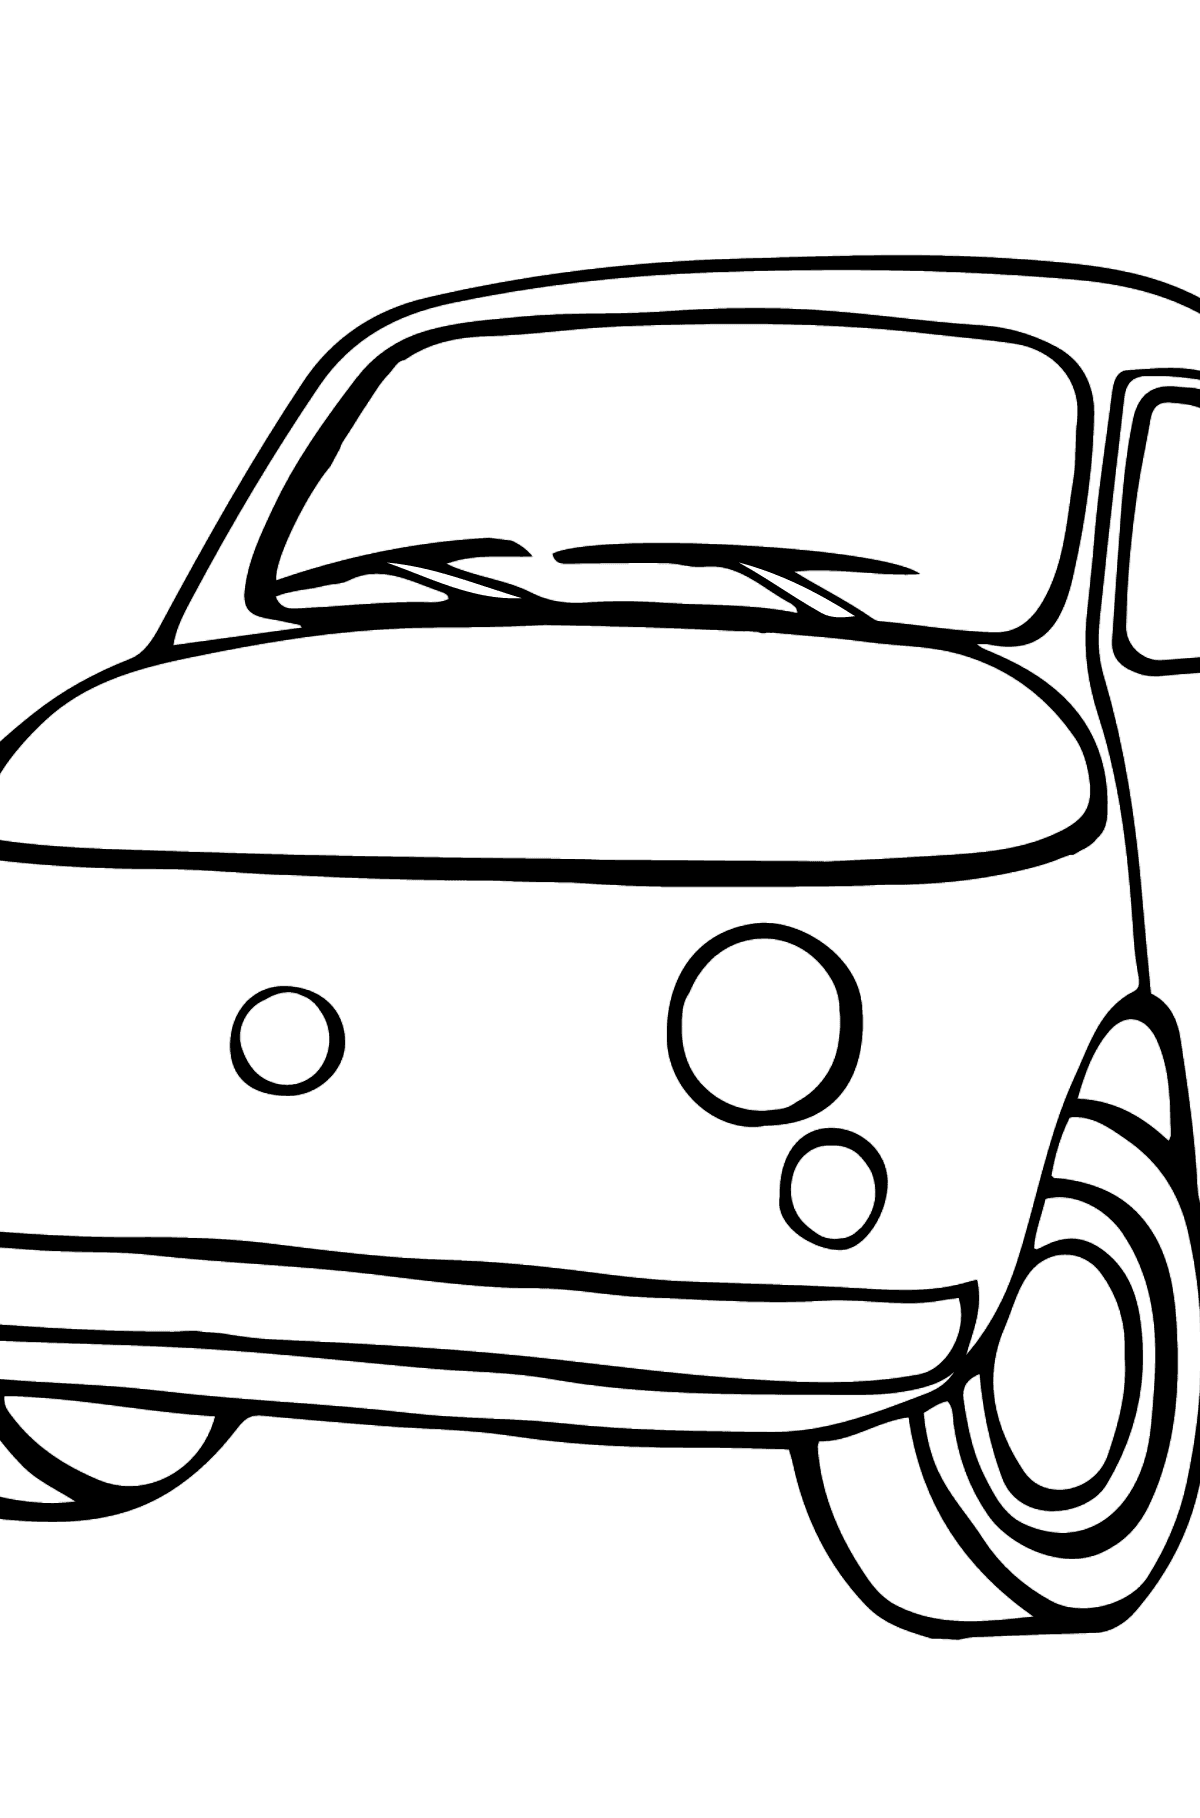 Fiat 500 (red car) coloring page - Coloring Pages for Kids